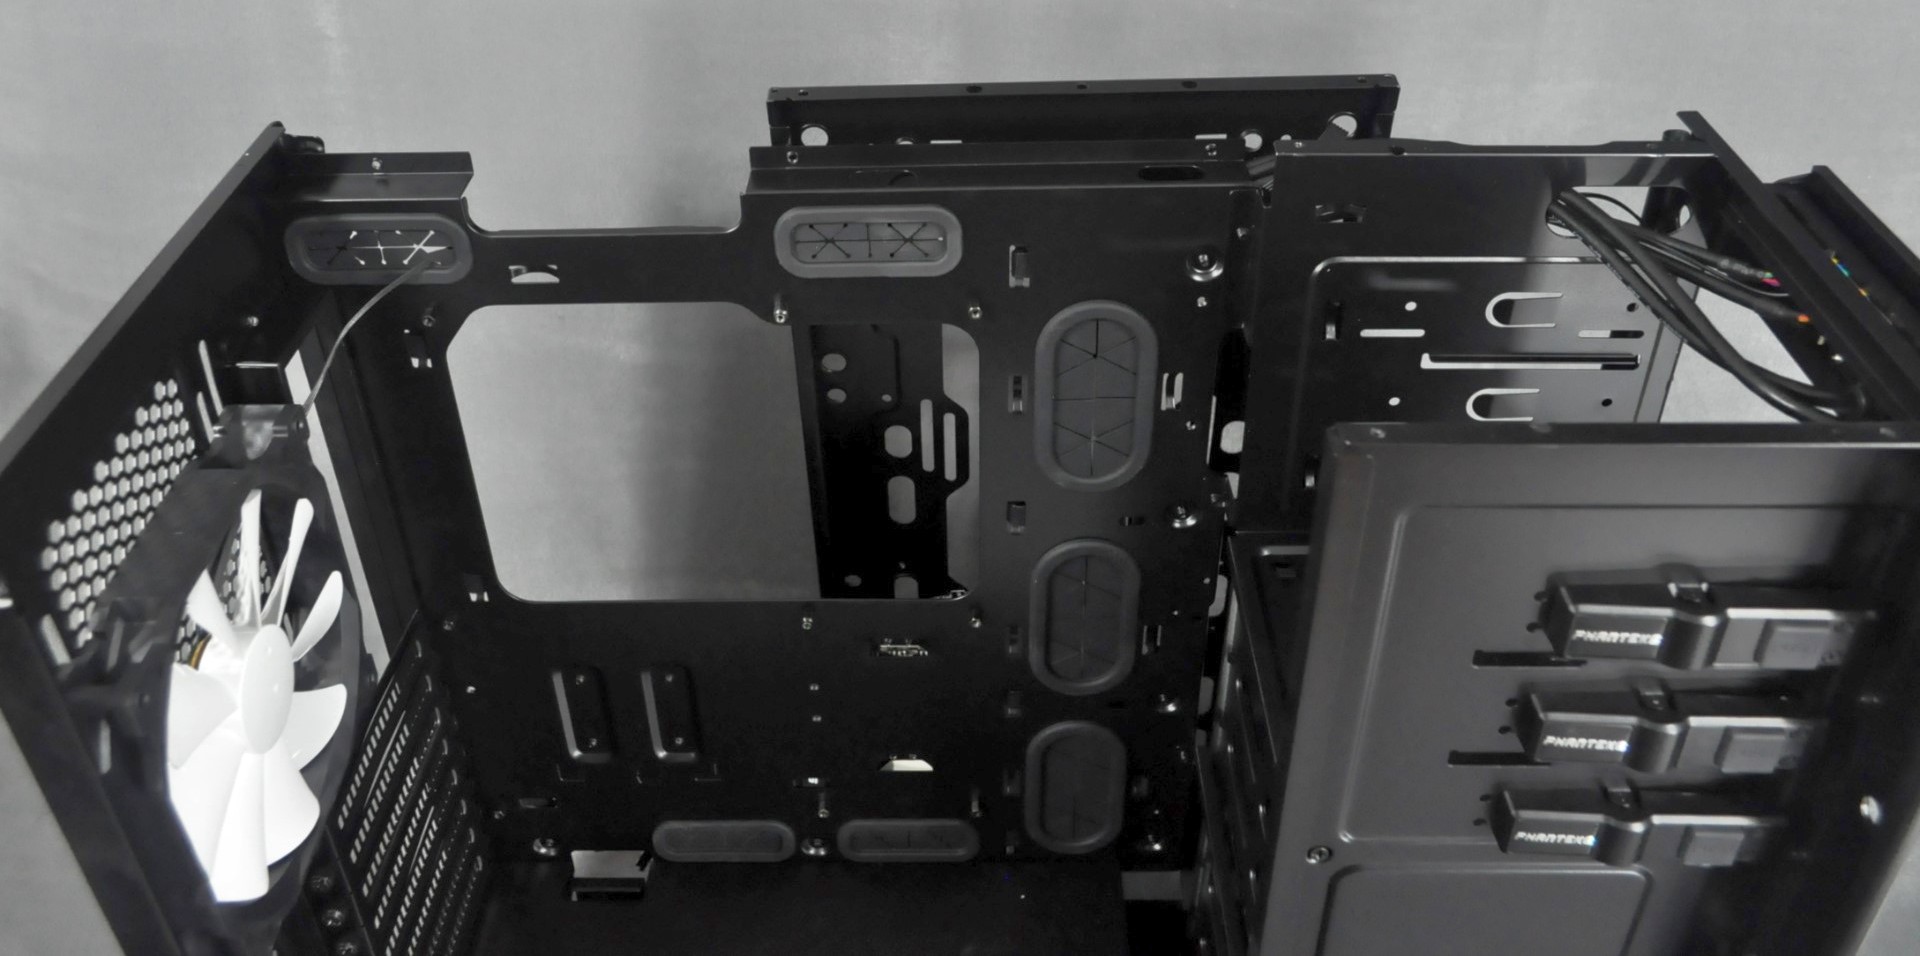 What Is The Size Of The Front Case Fan For Enthoo Pro